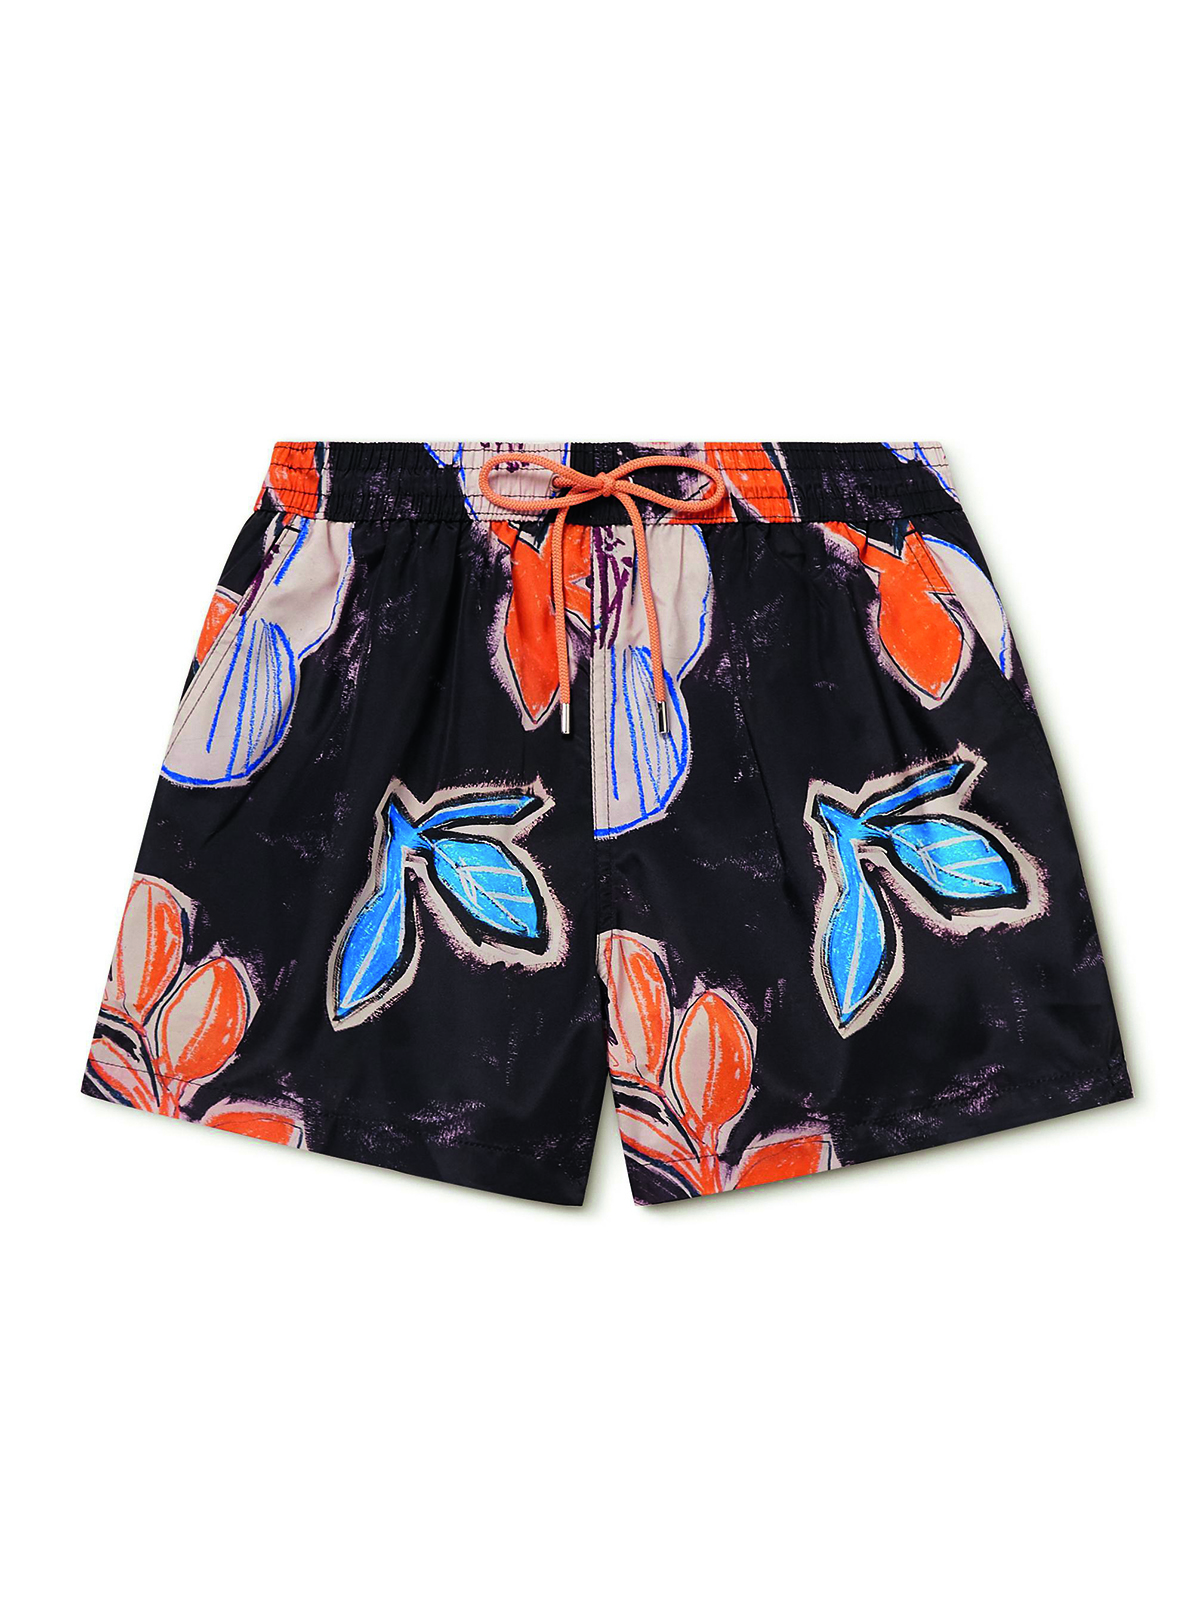 swimming trunks with blue and orange flowers on them